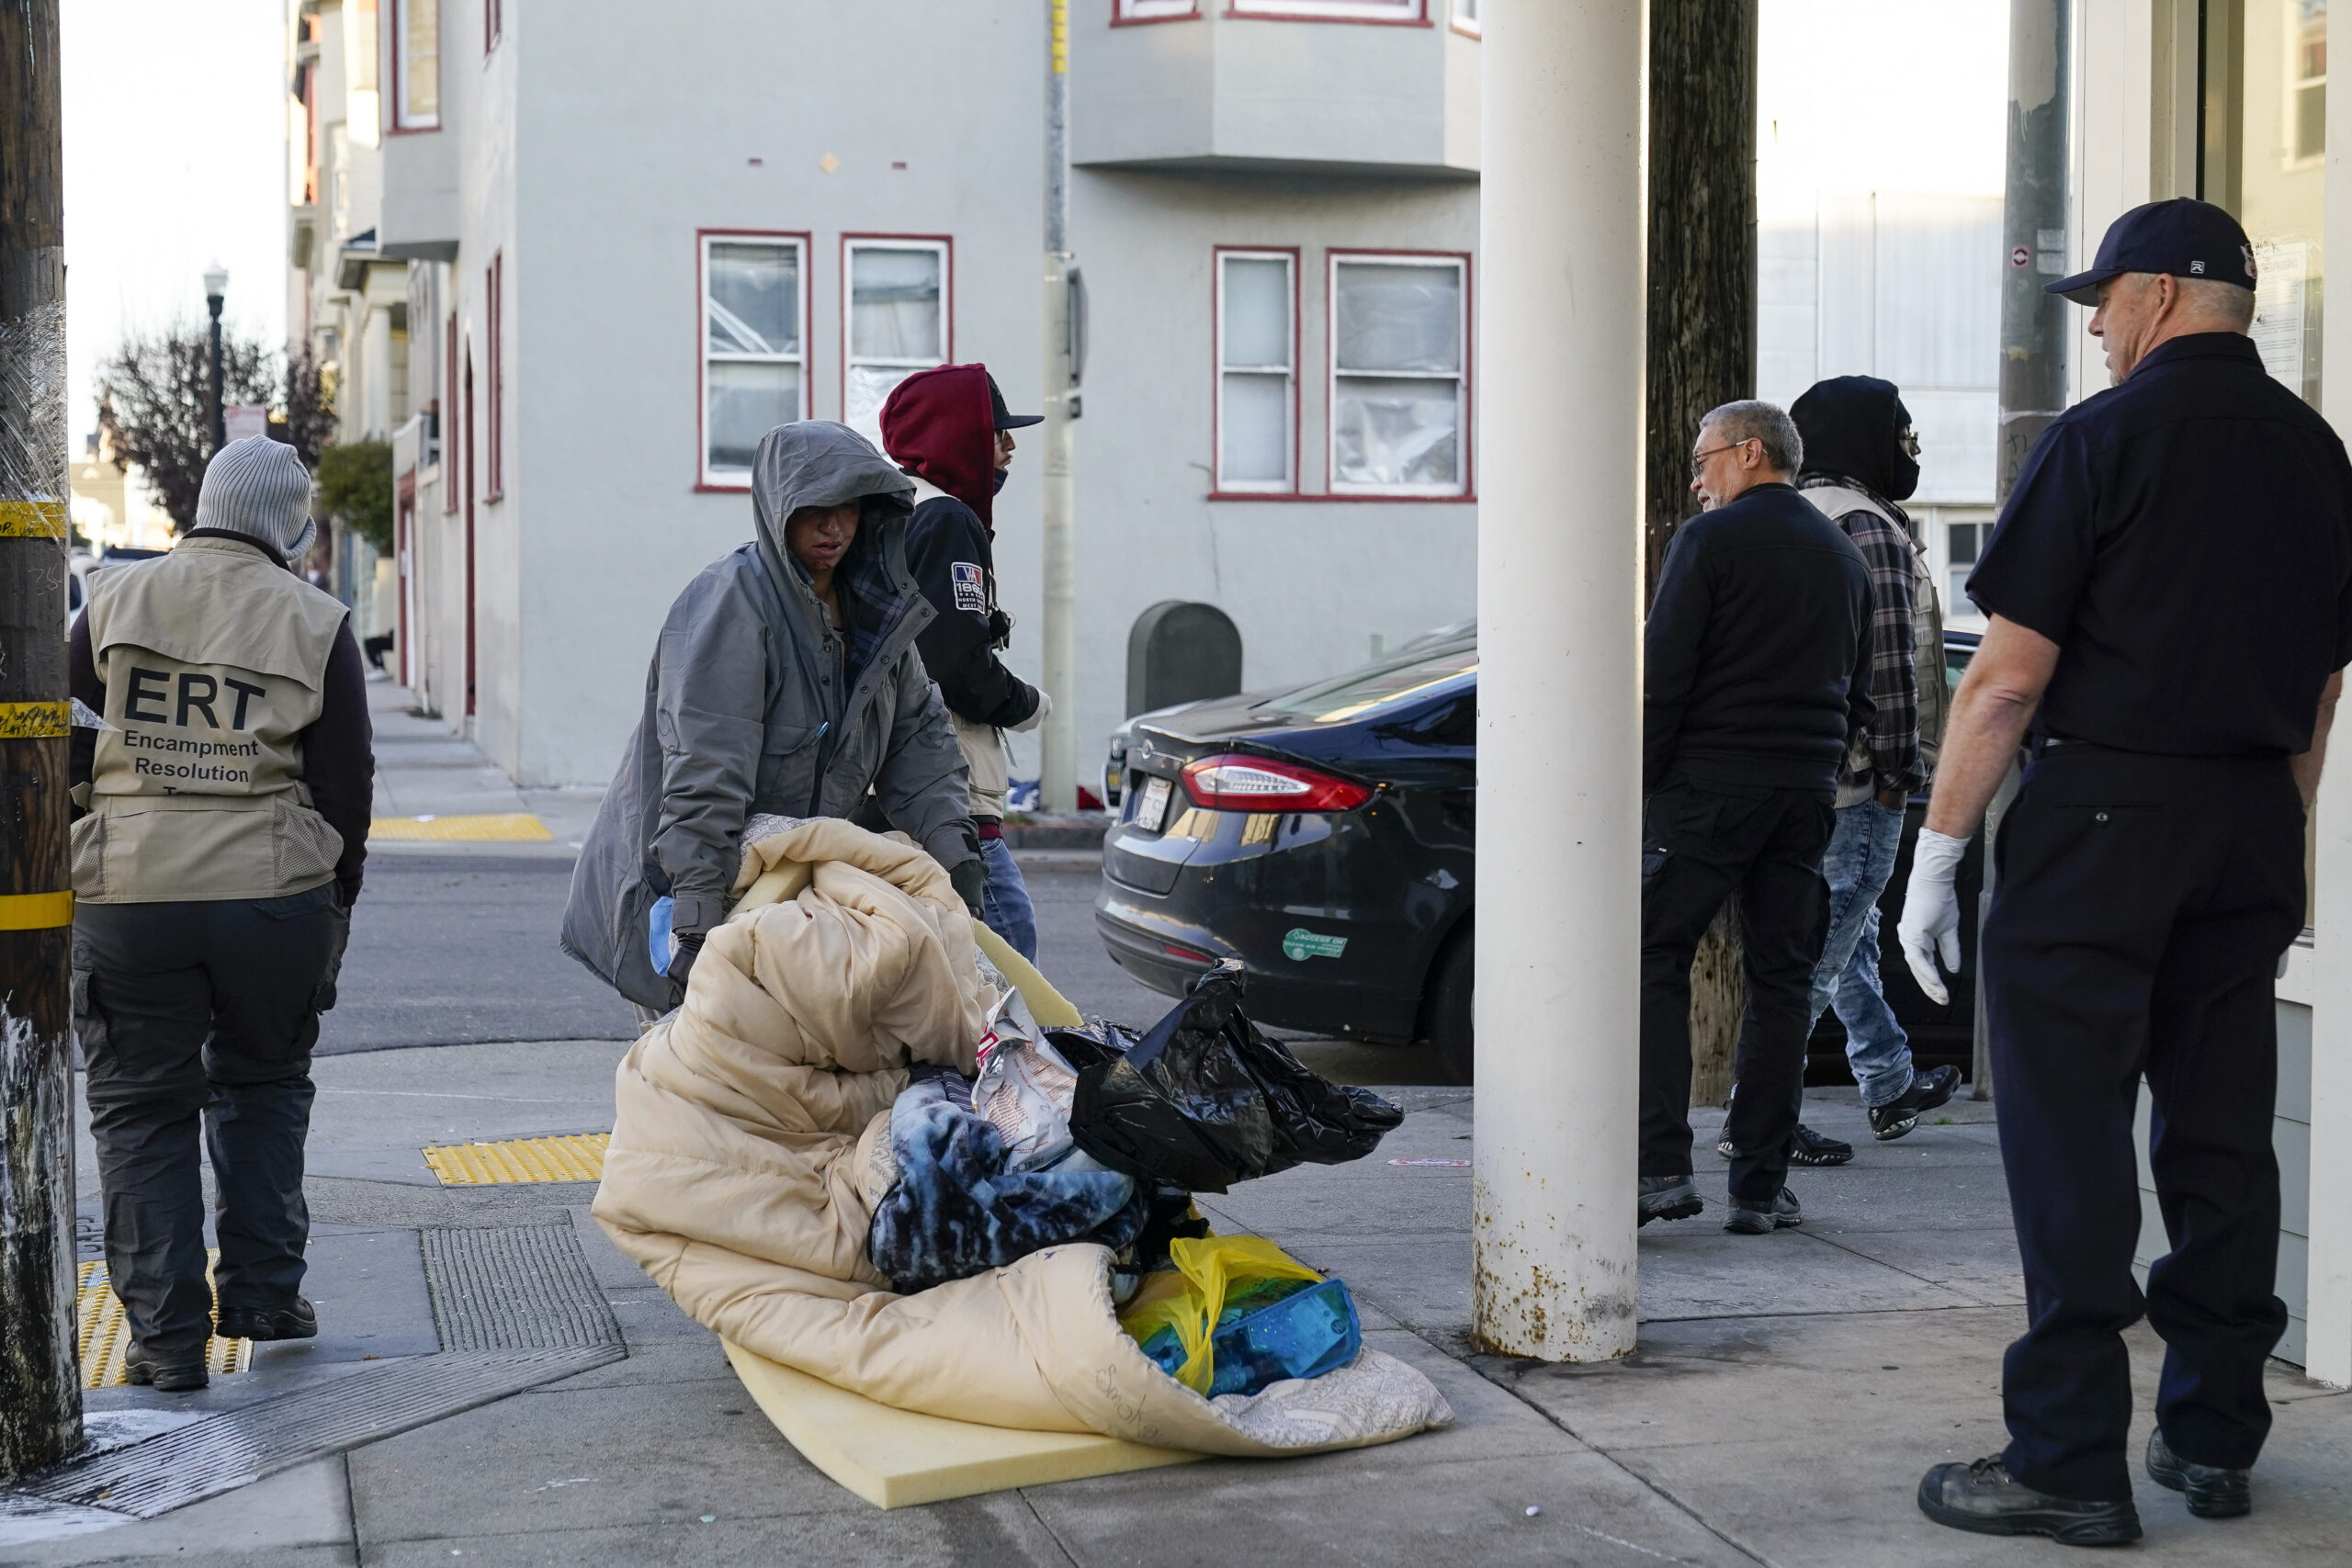 New Study: 90% of State’s Homeless Are Local; 45% Report High Drug, Alcohol Use